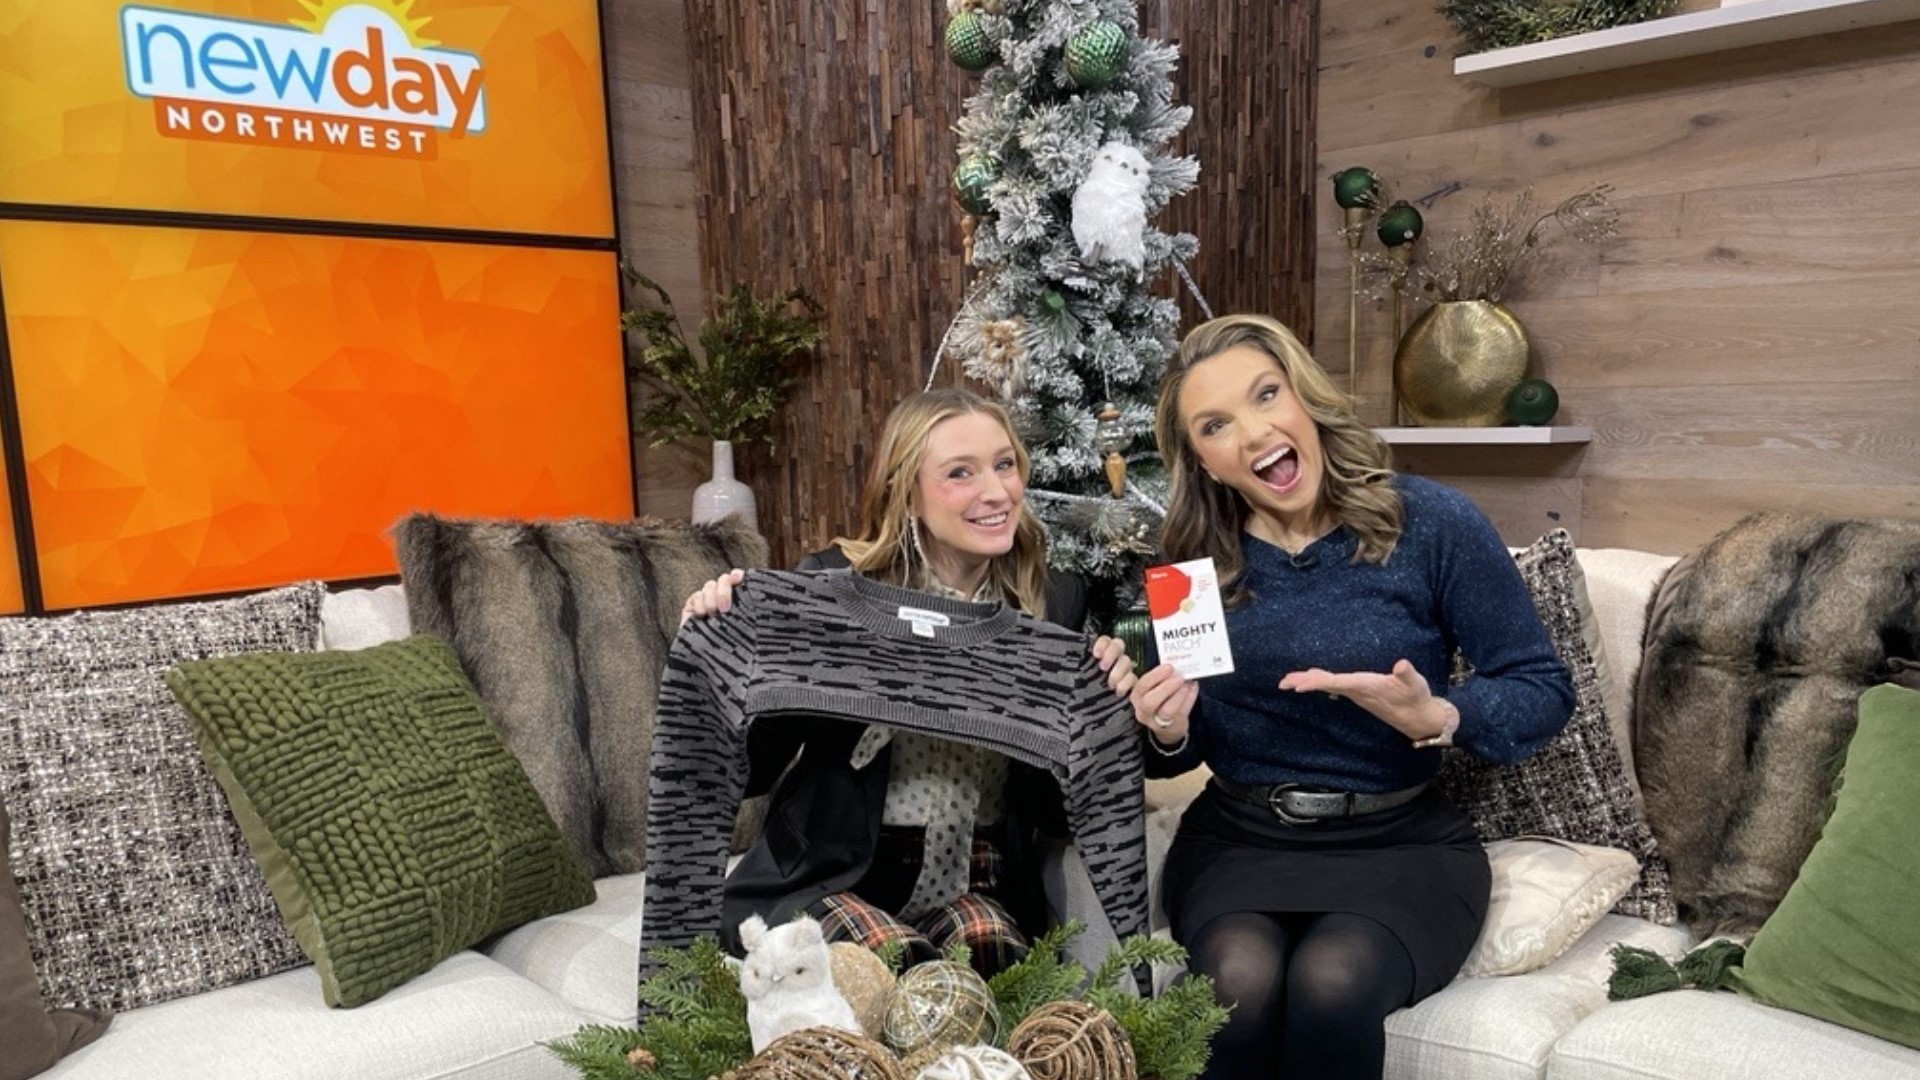 Stylist Darcy Camden answers viewer’s questions about holiday style. #newdaynw